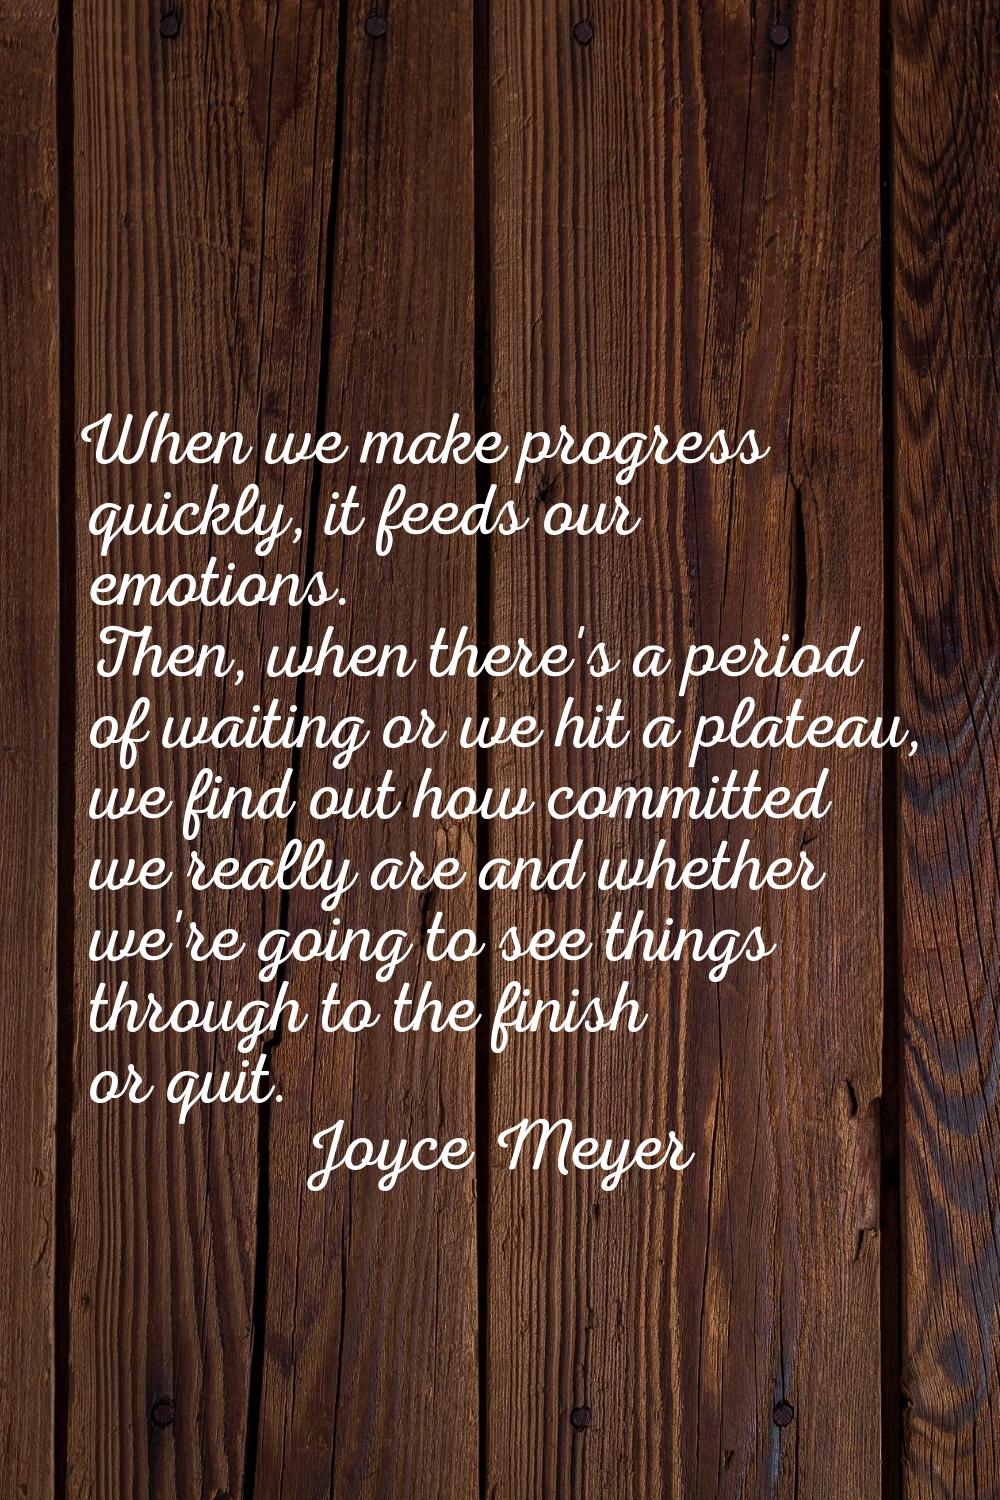 When we make progress quickly, it feeds our emotions. Then, when there's a period of waiting or we 